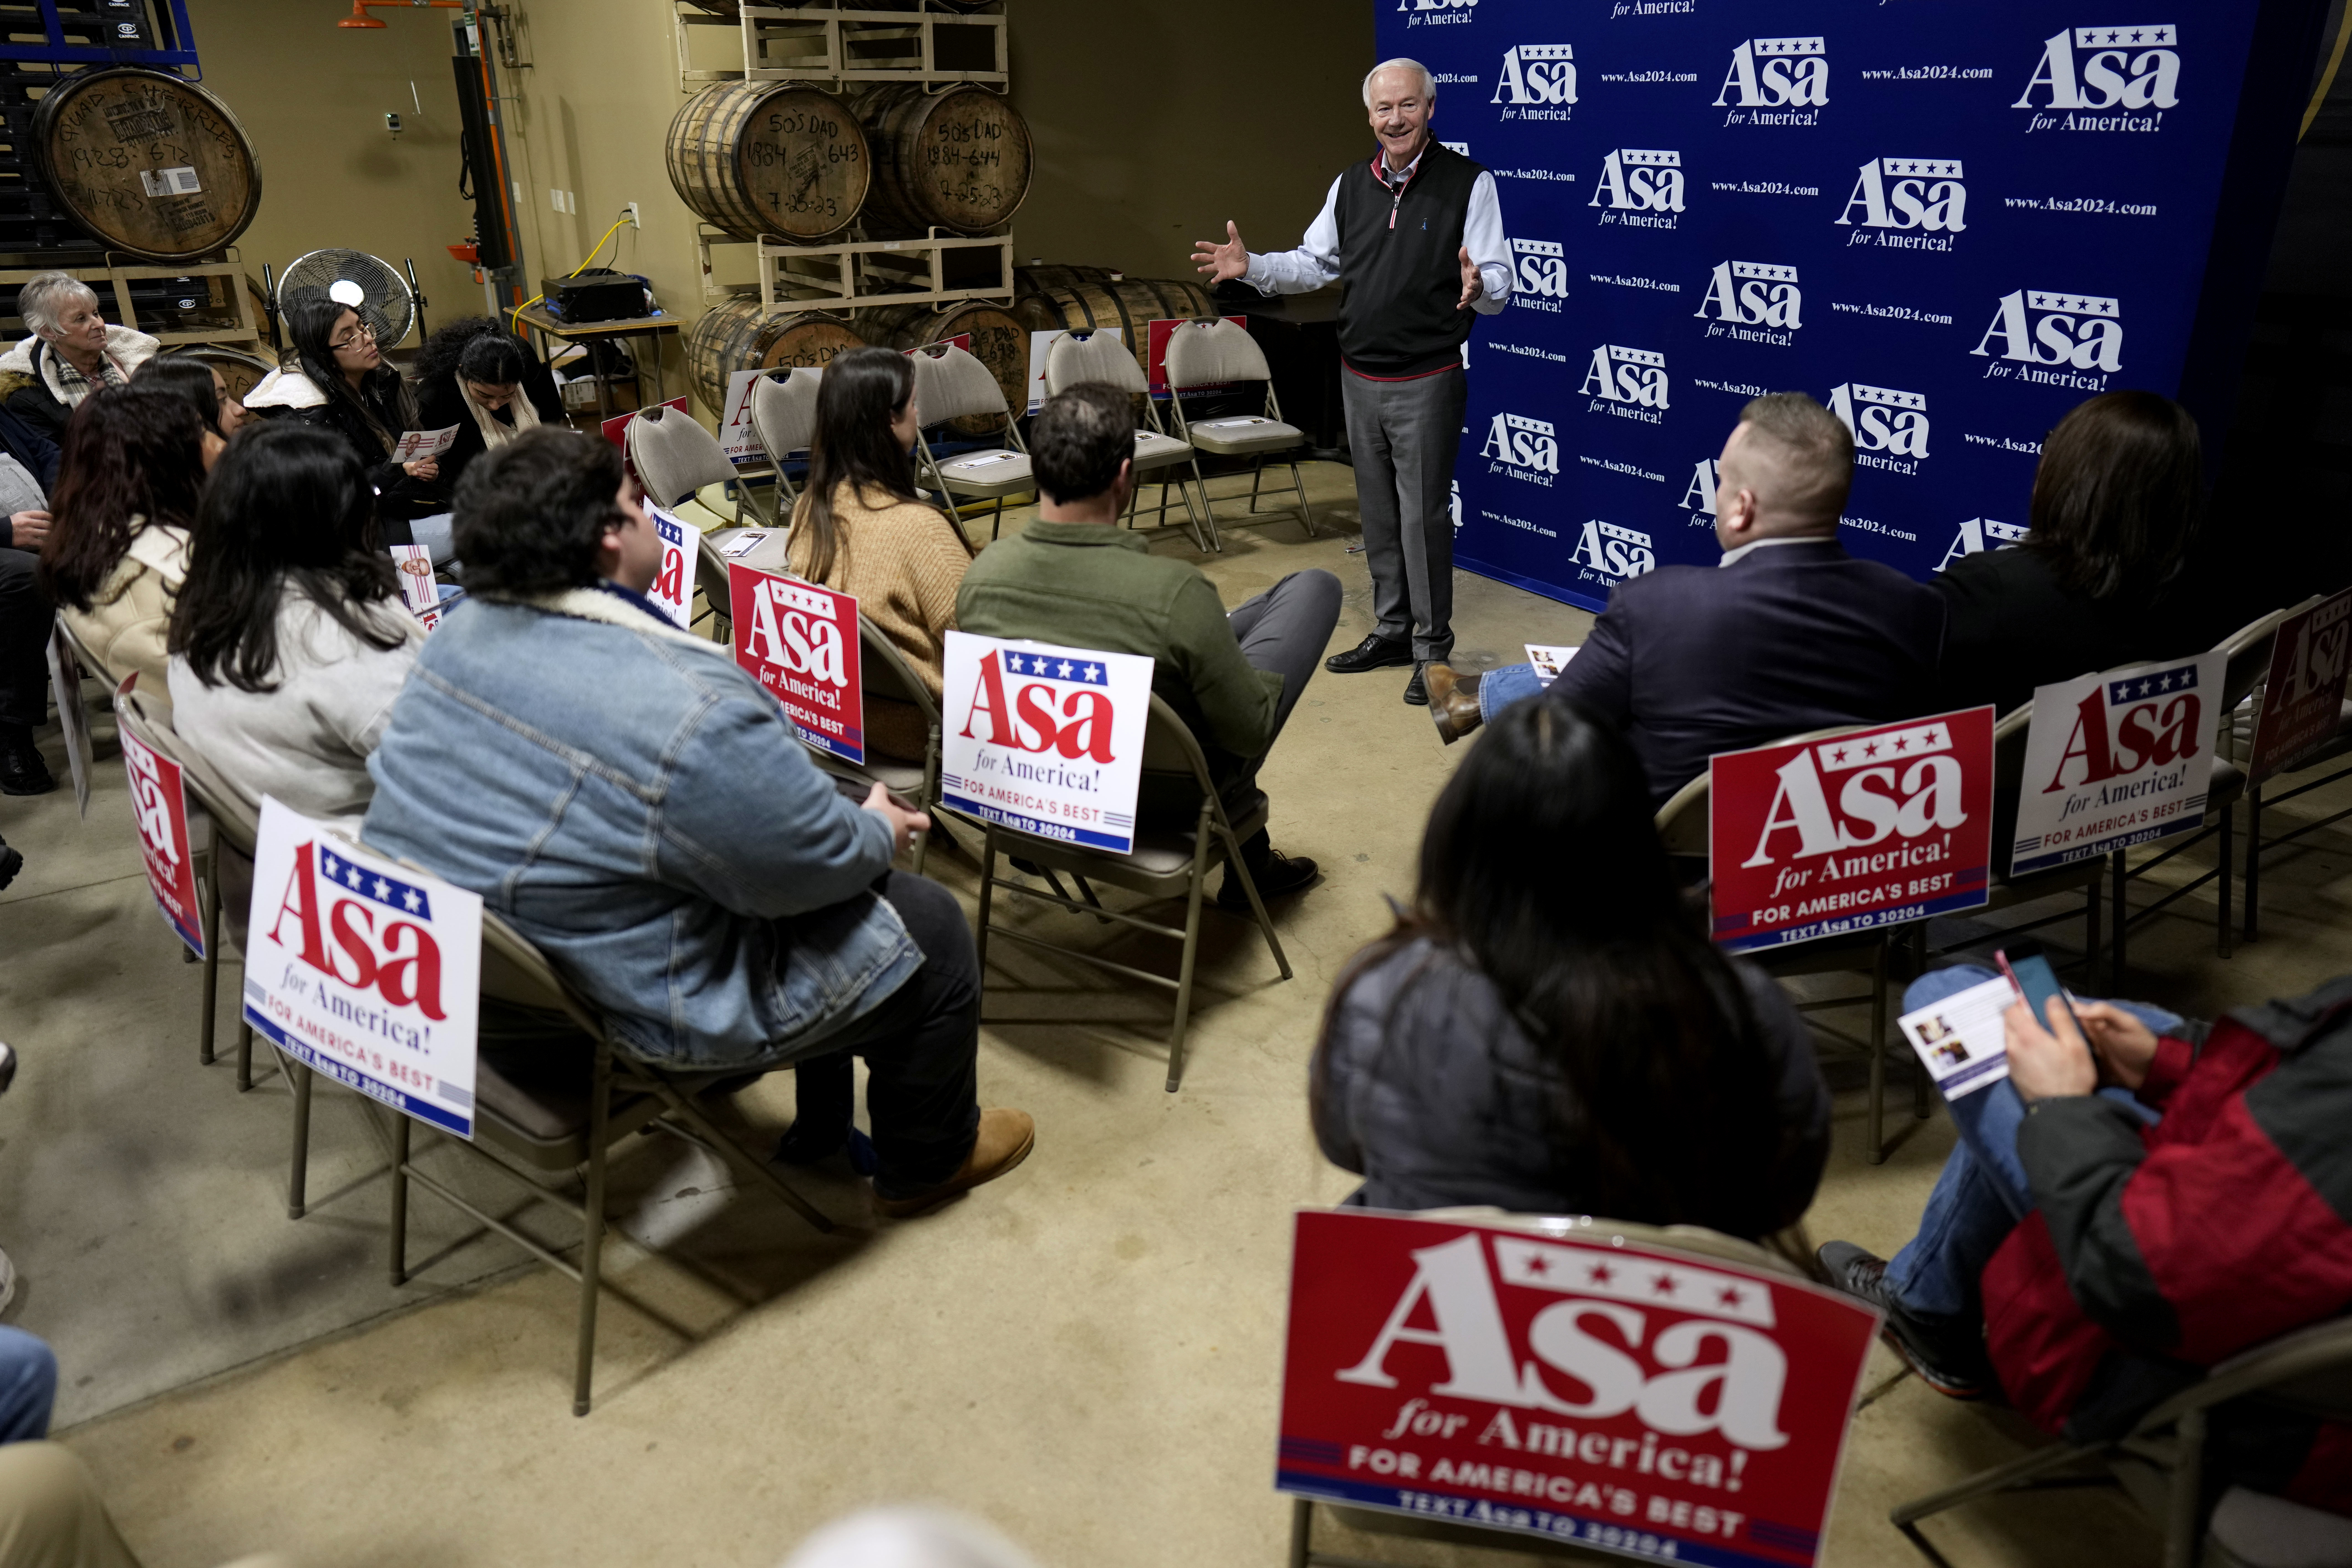 Republican presidential candidate Asa Hutchinson speaks during a campaign event in Des Moines, Iowa, on January 3.